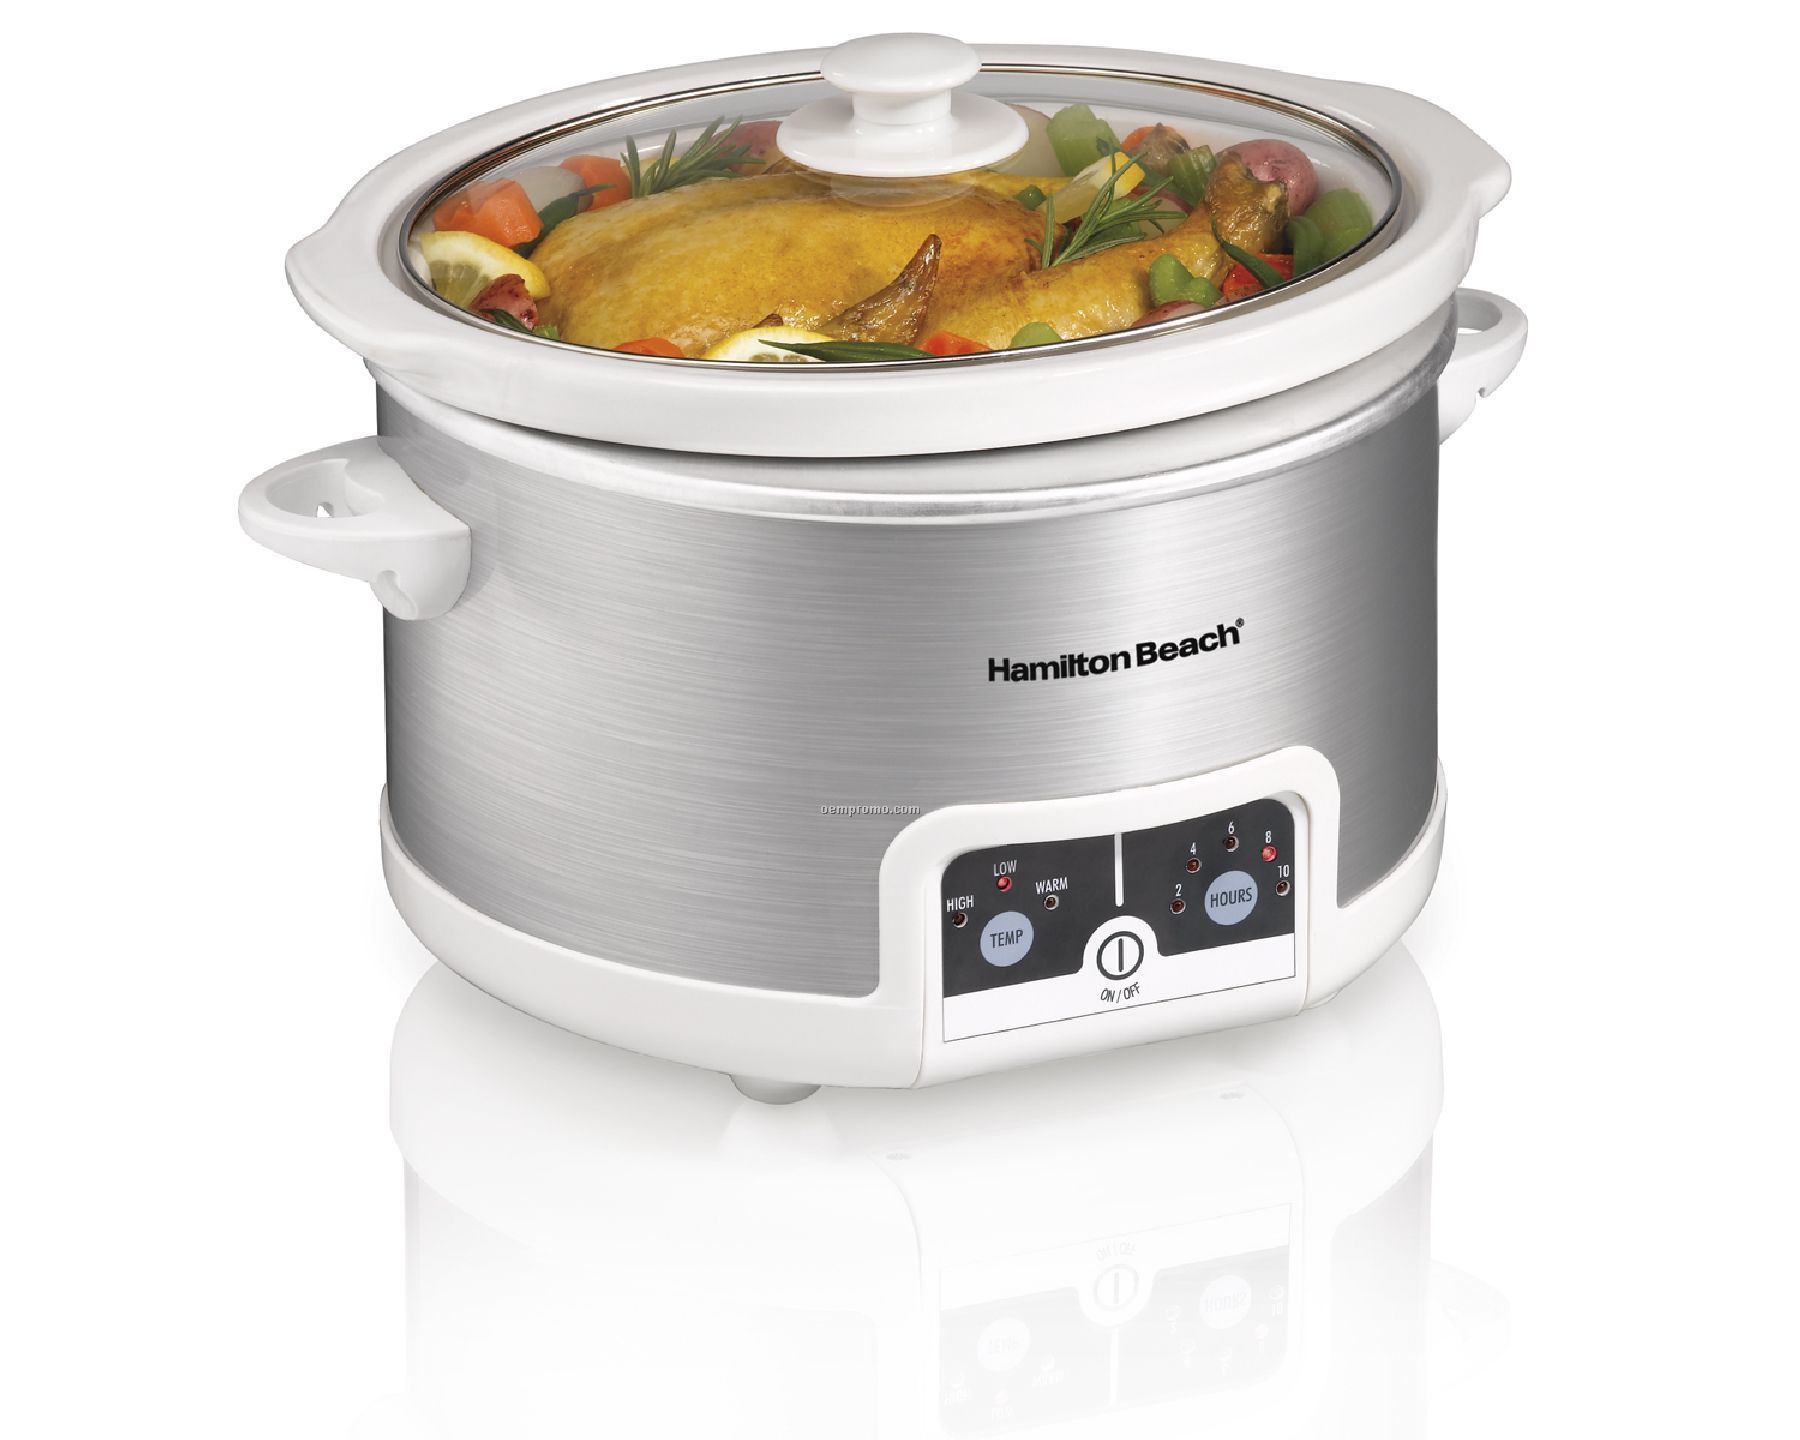 Hamilton Beach - Slow Cookers - 4.5 Qt Oval With Programmable